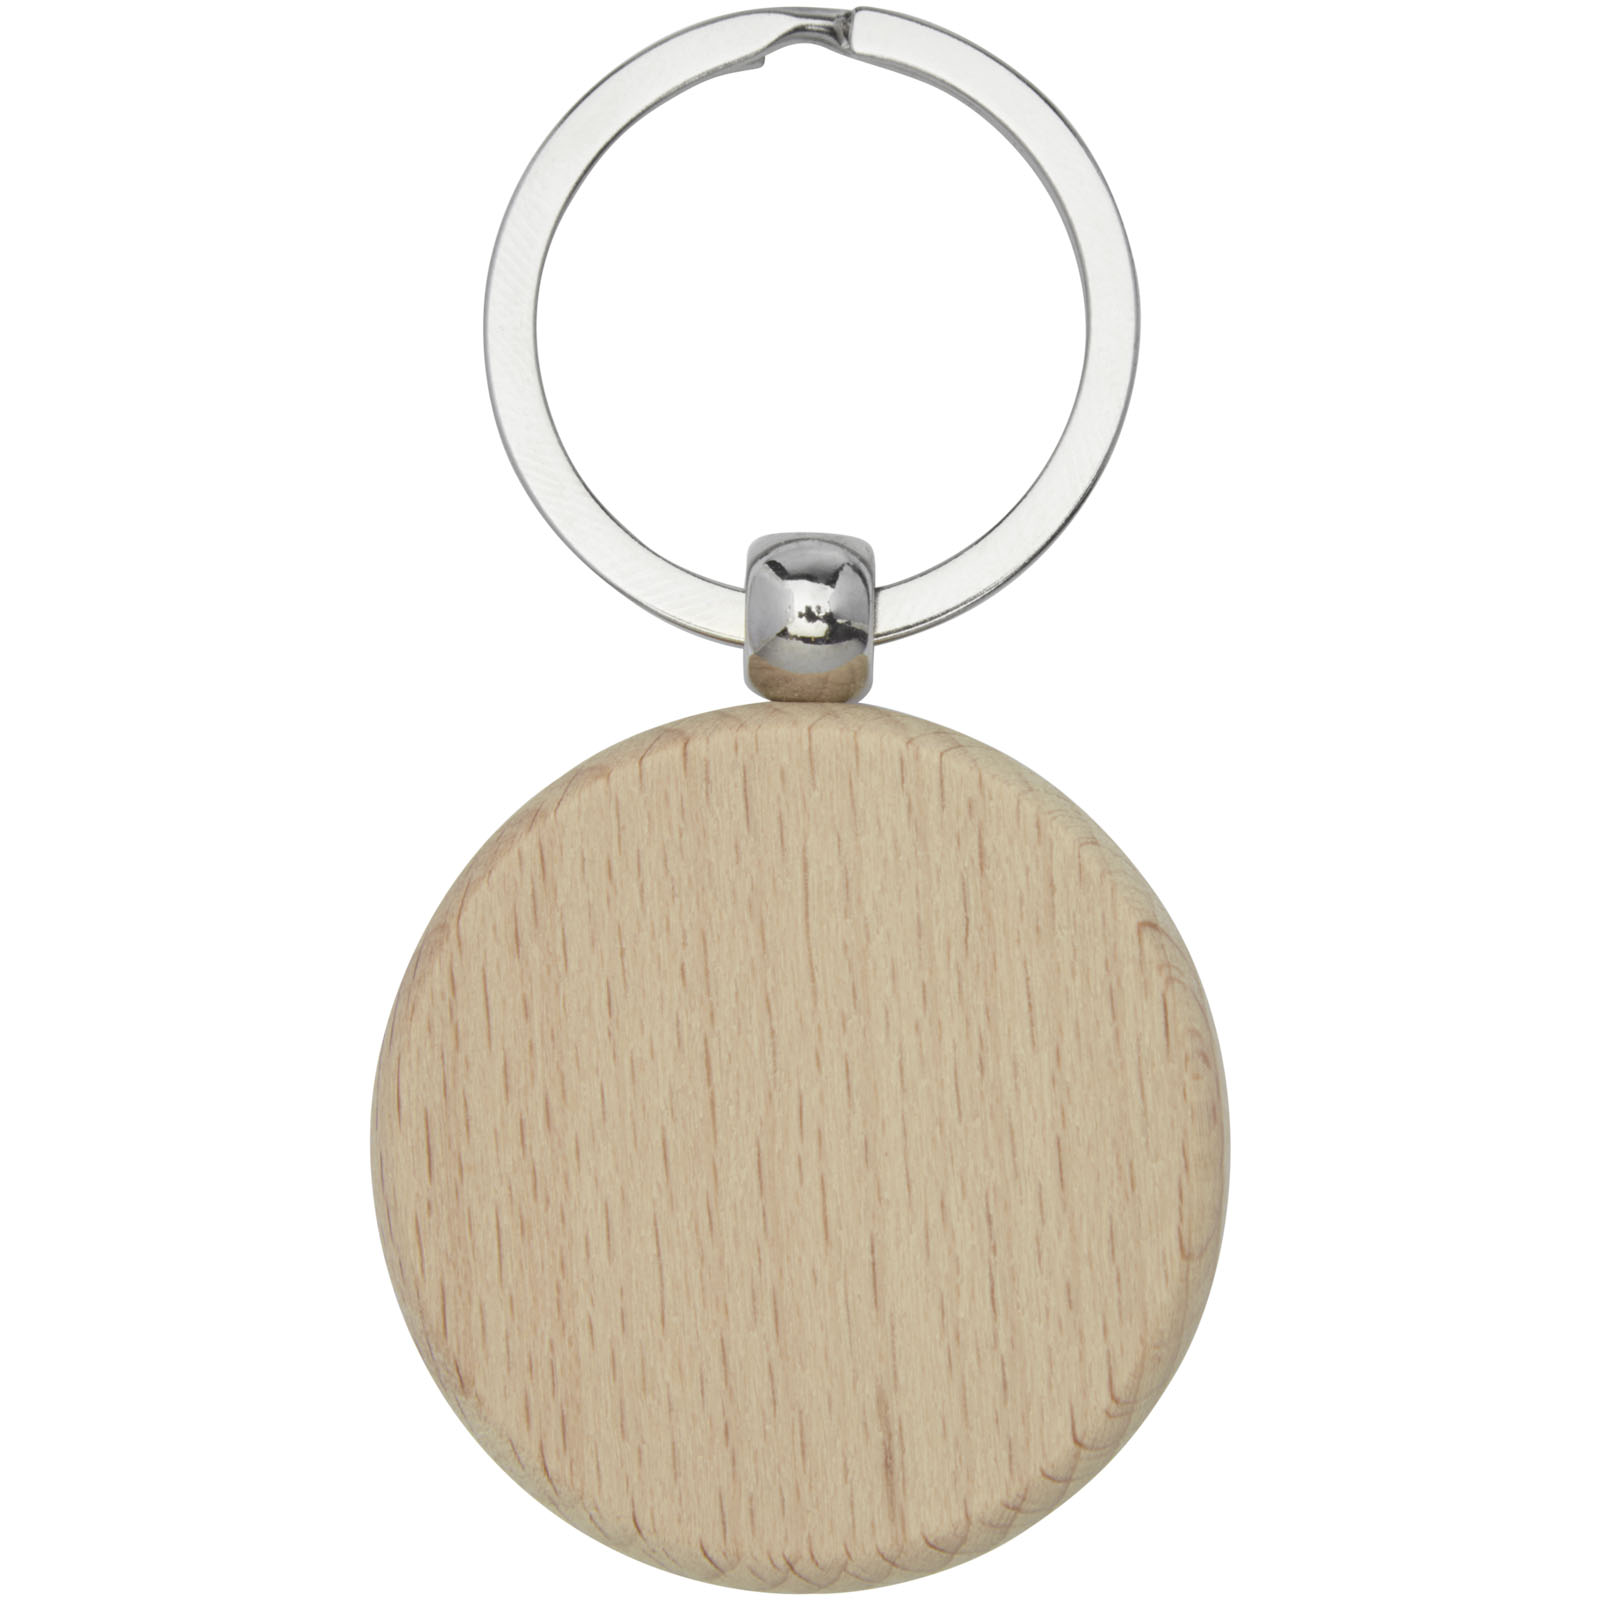 Advertising Keychains & Keyrings - Giovanni beech wood round keychain - 2